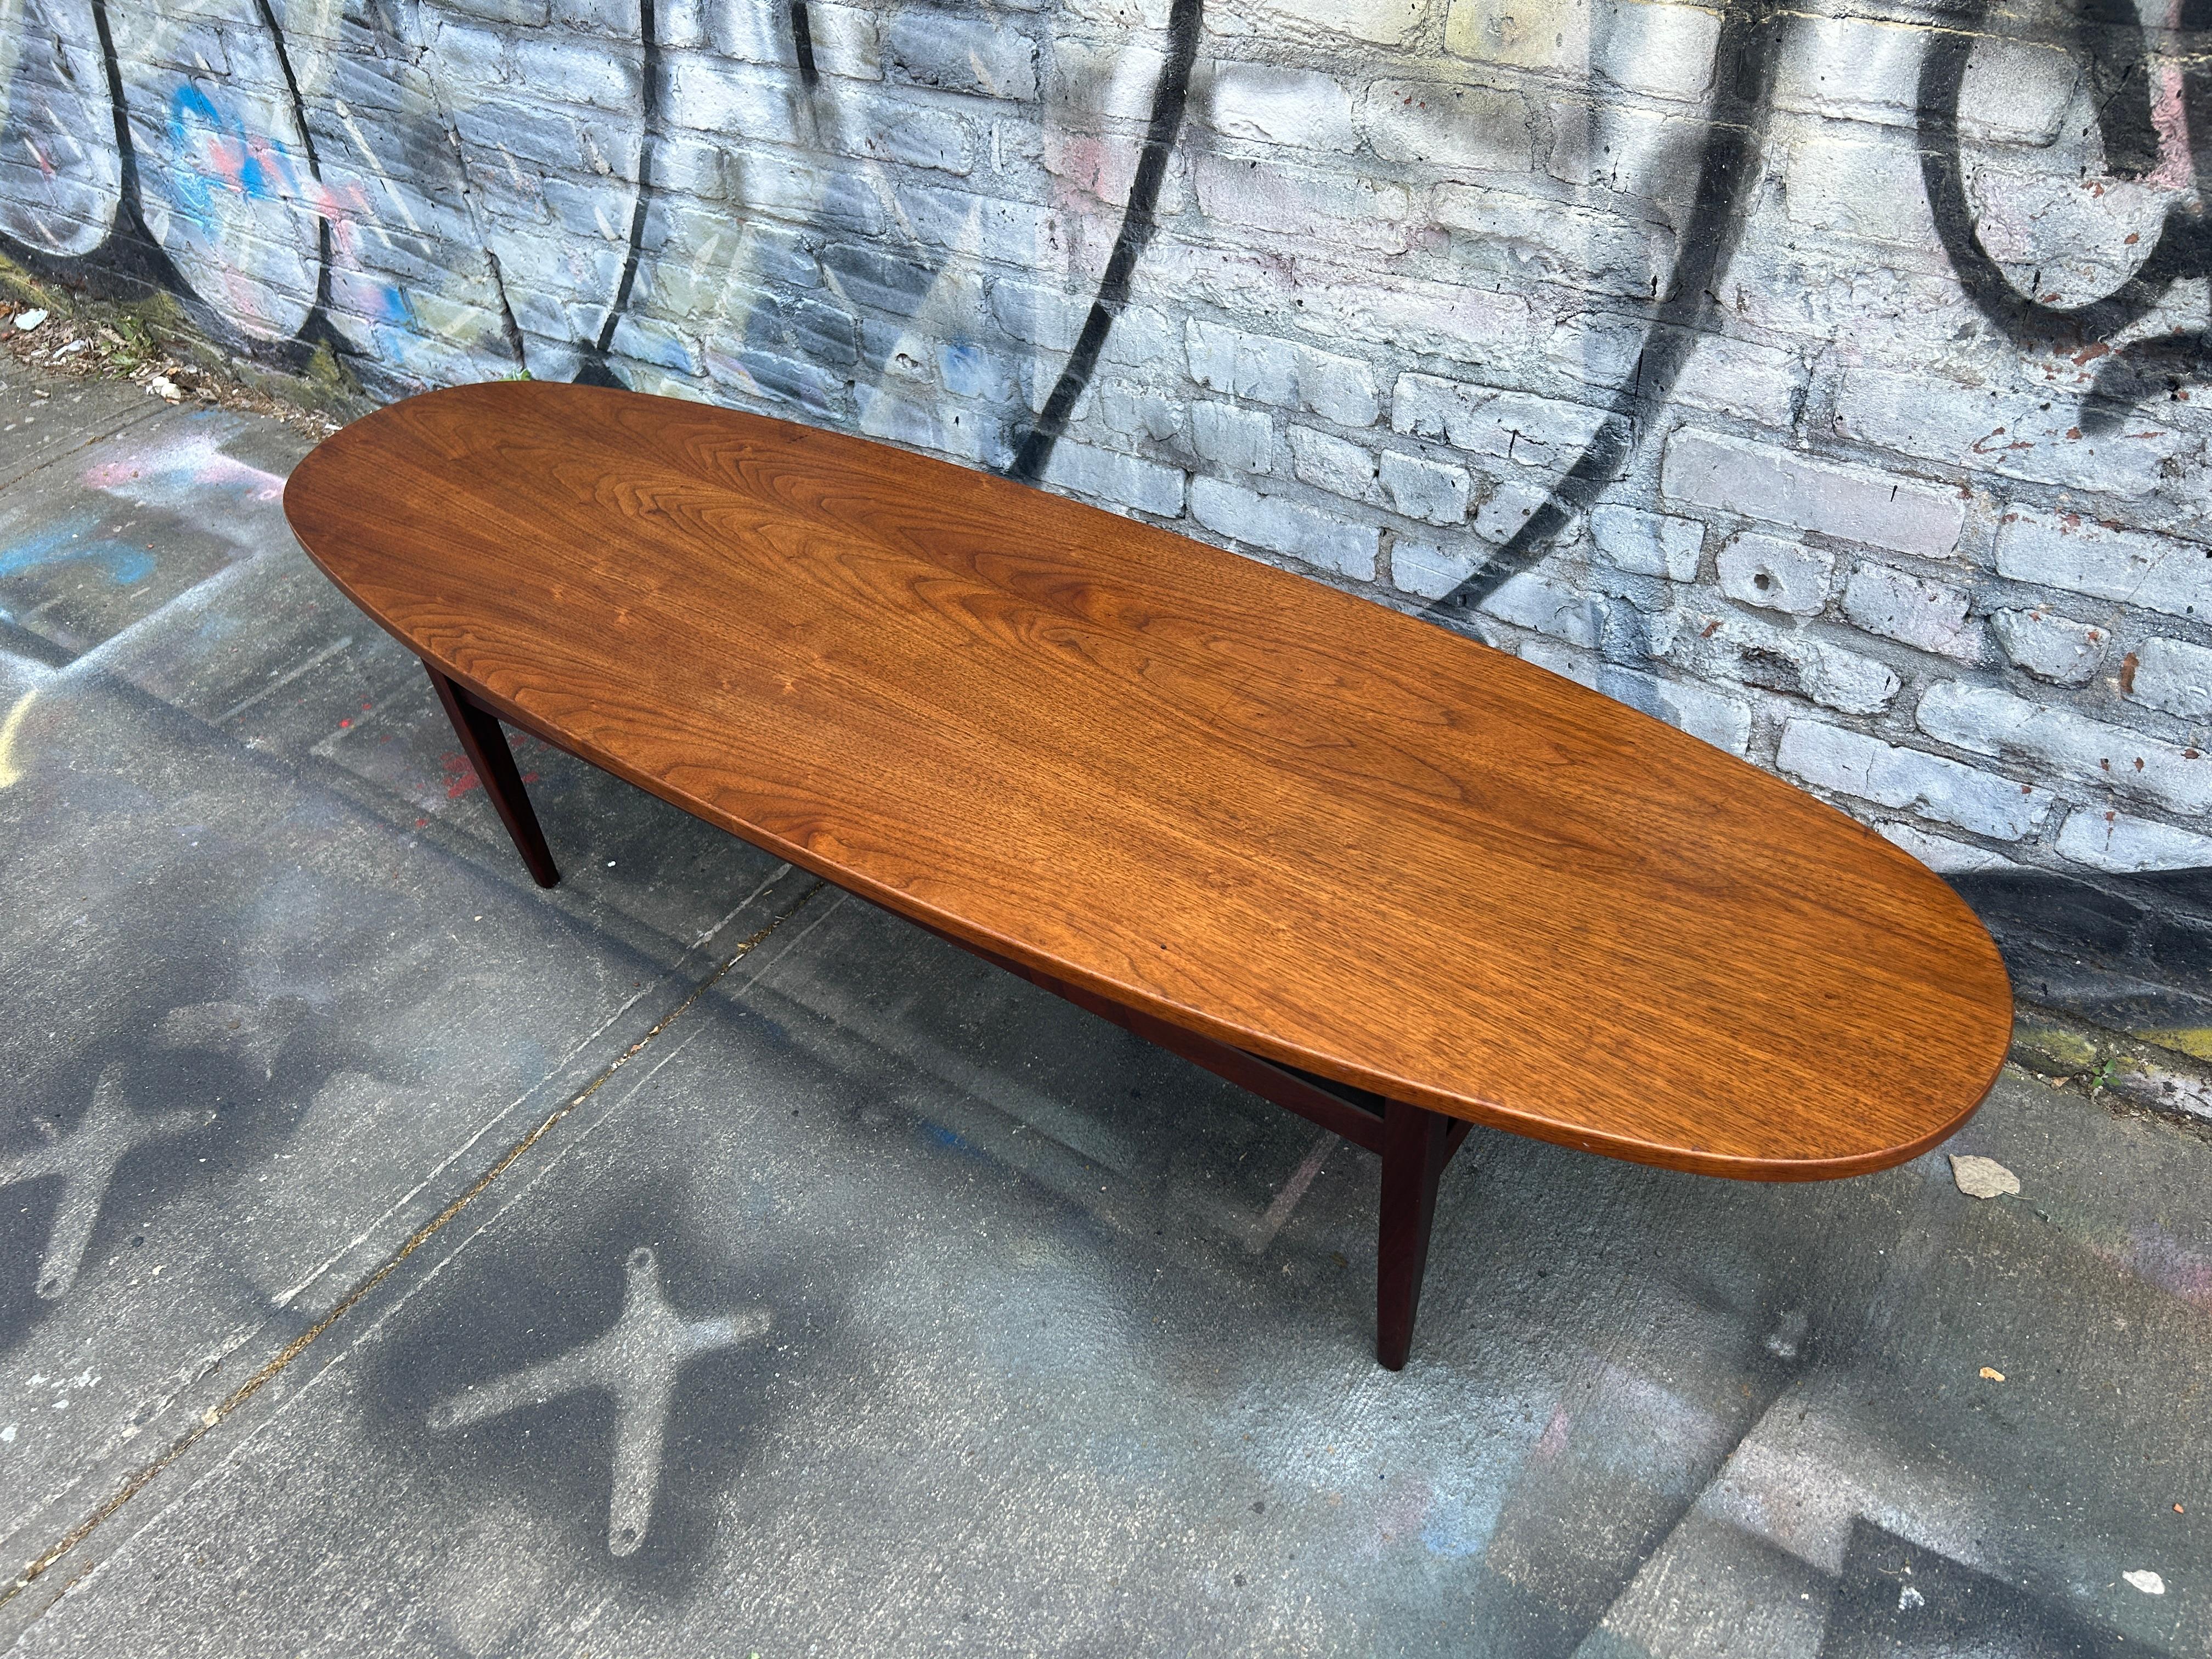 Mid century modern walnut surfboard oval low coffee table Lane. Good Vintage Condition. Very Nice Grain. Made in USA Circa 1960. Located in Brooklyn NYC.

Measures 60